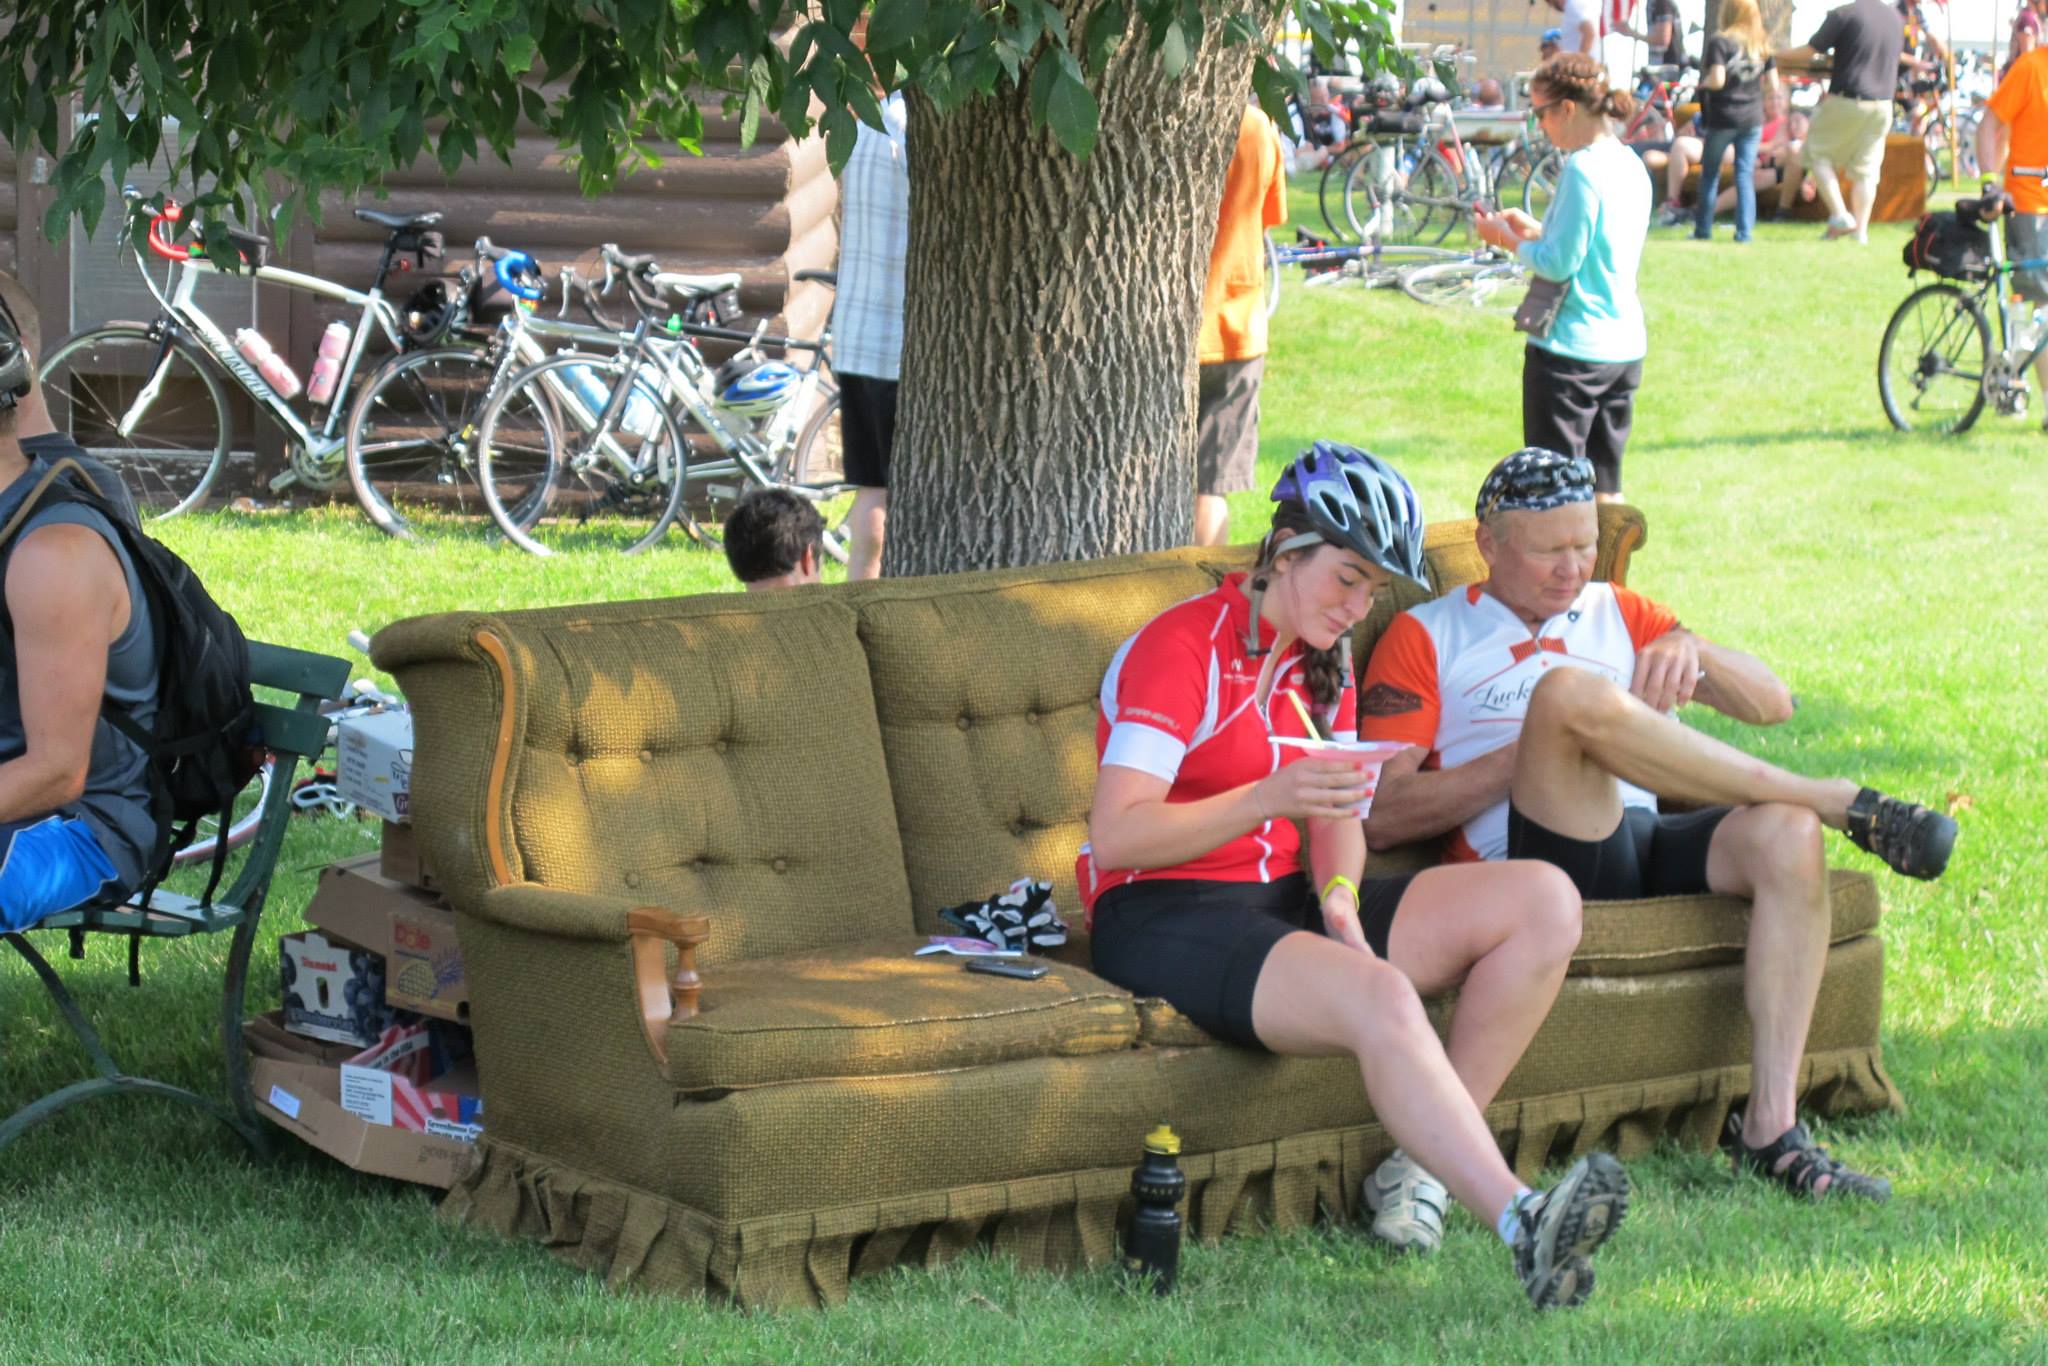 Pull up a couch in the shade of a tree and rest those weary legs.